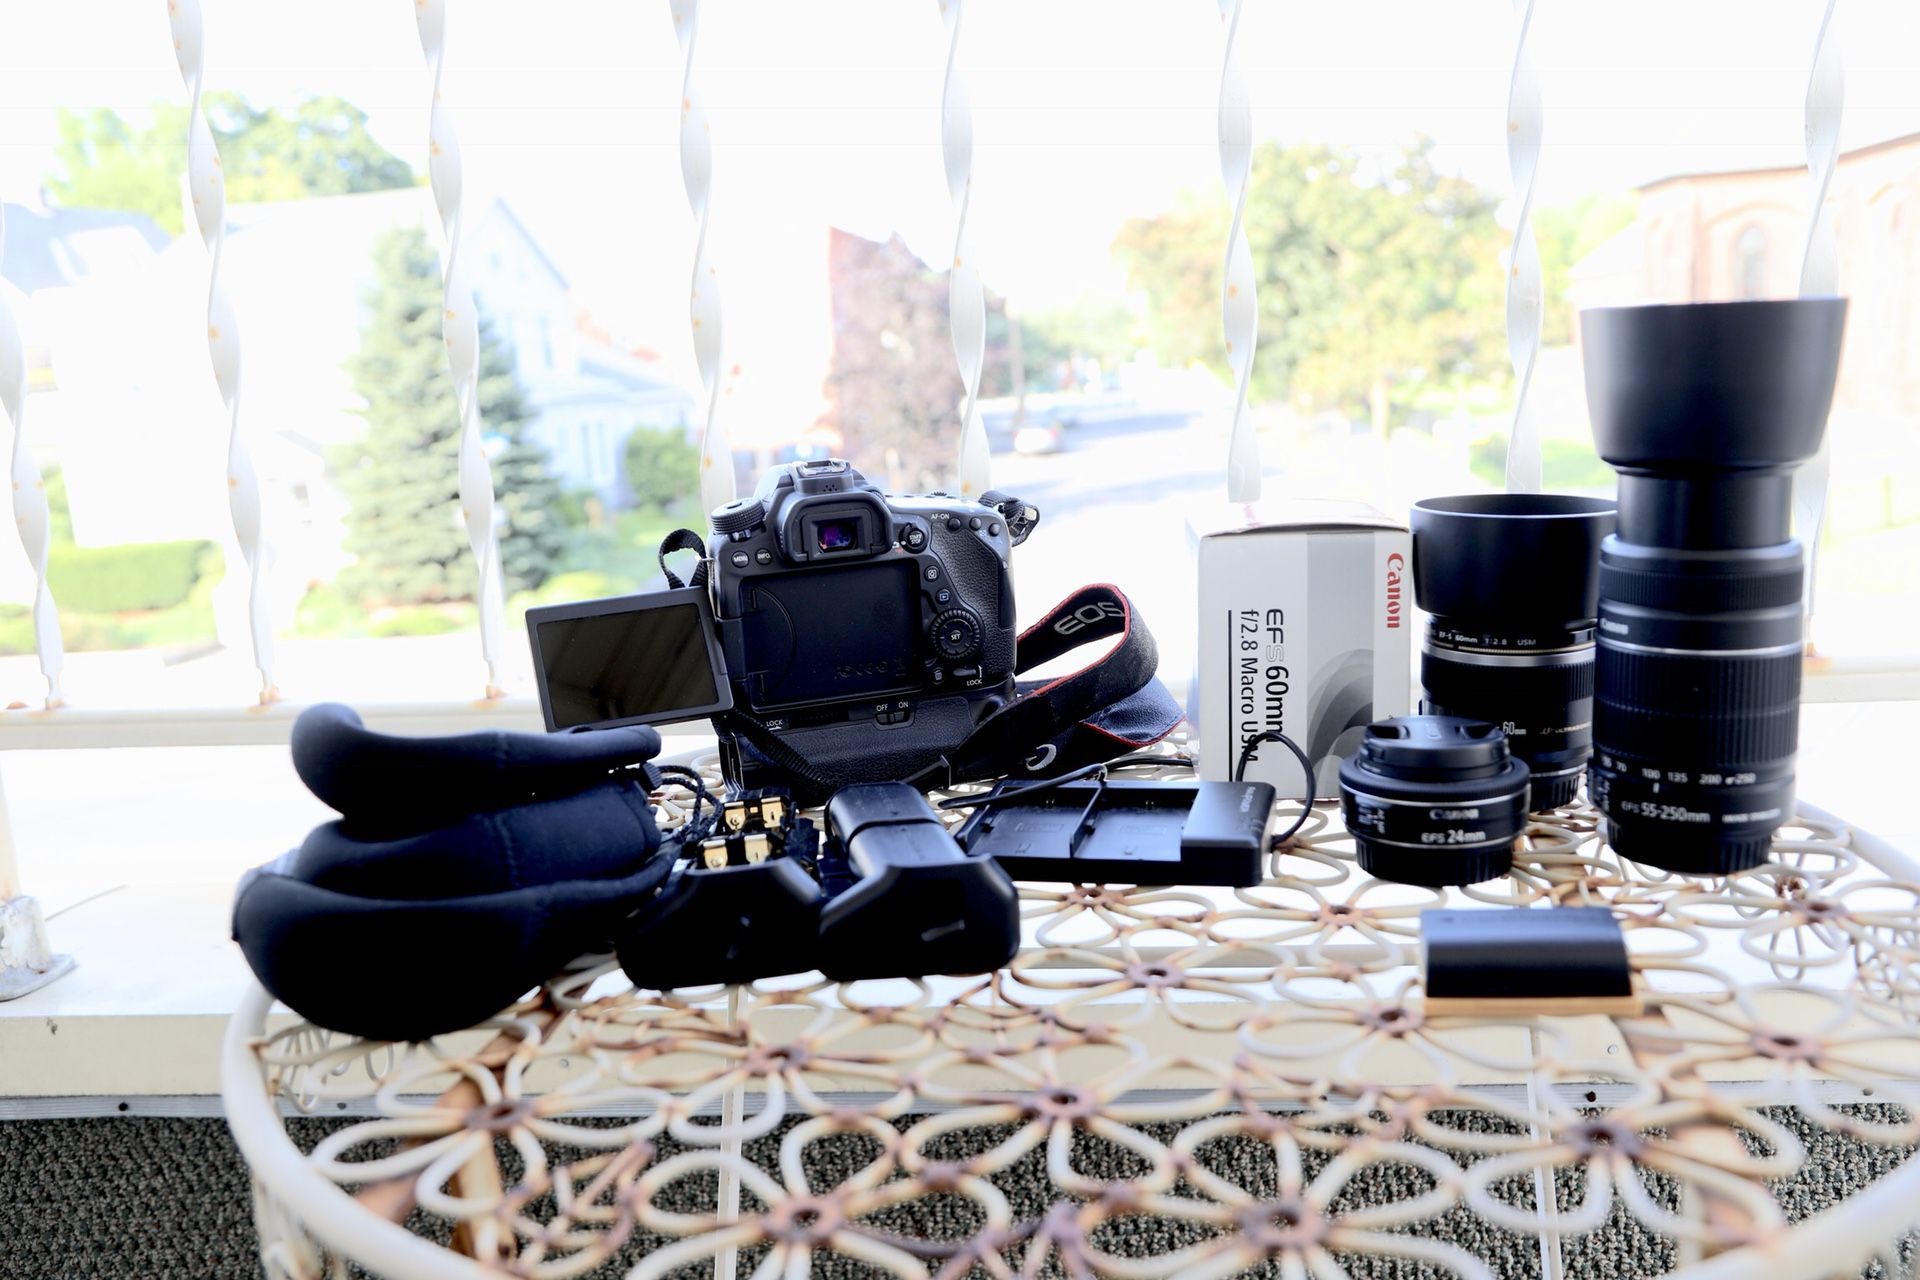 Canon 80d with battery grip and lenses